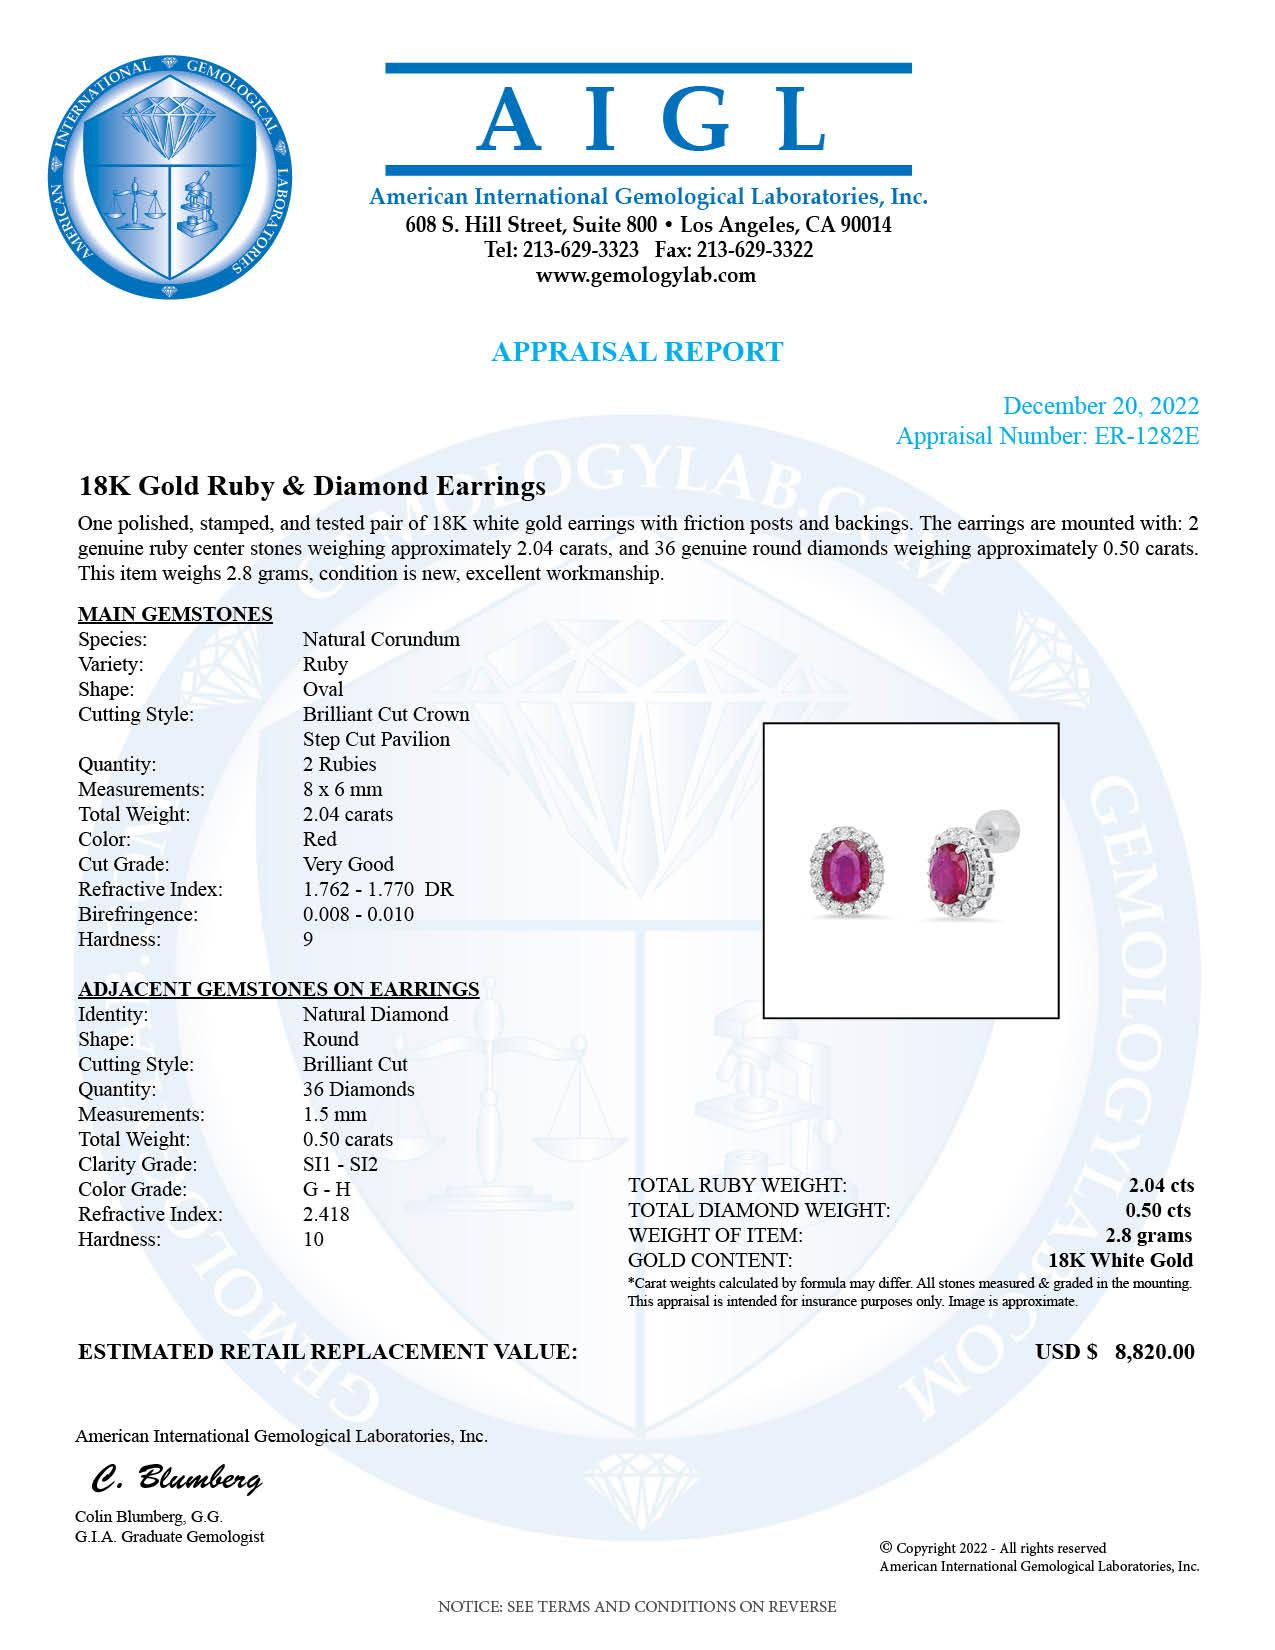 18K White Gold Setting with 2.04ct Ruby and 0.50ct Diamond Earrings